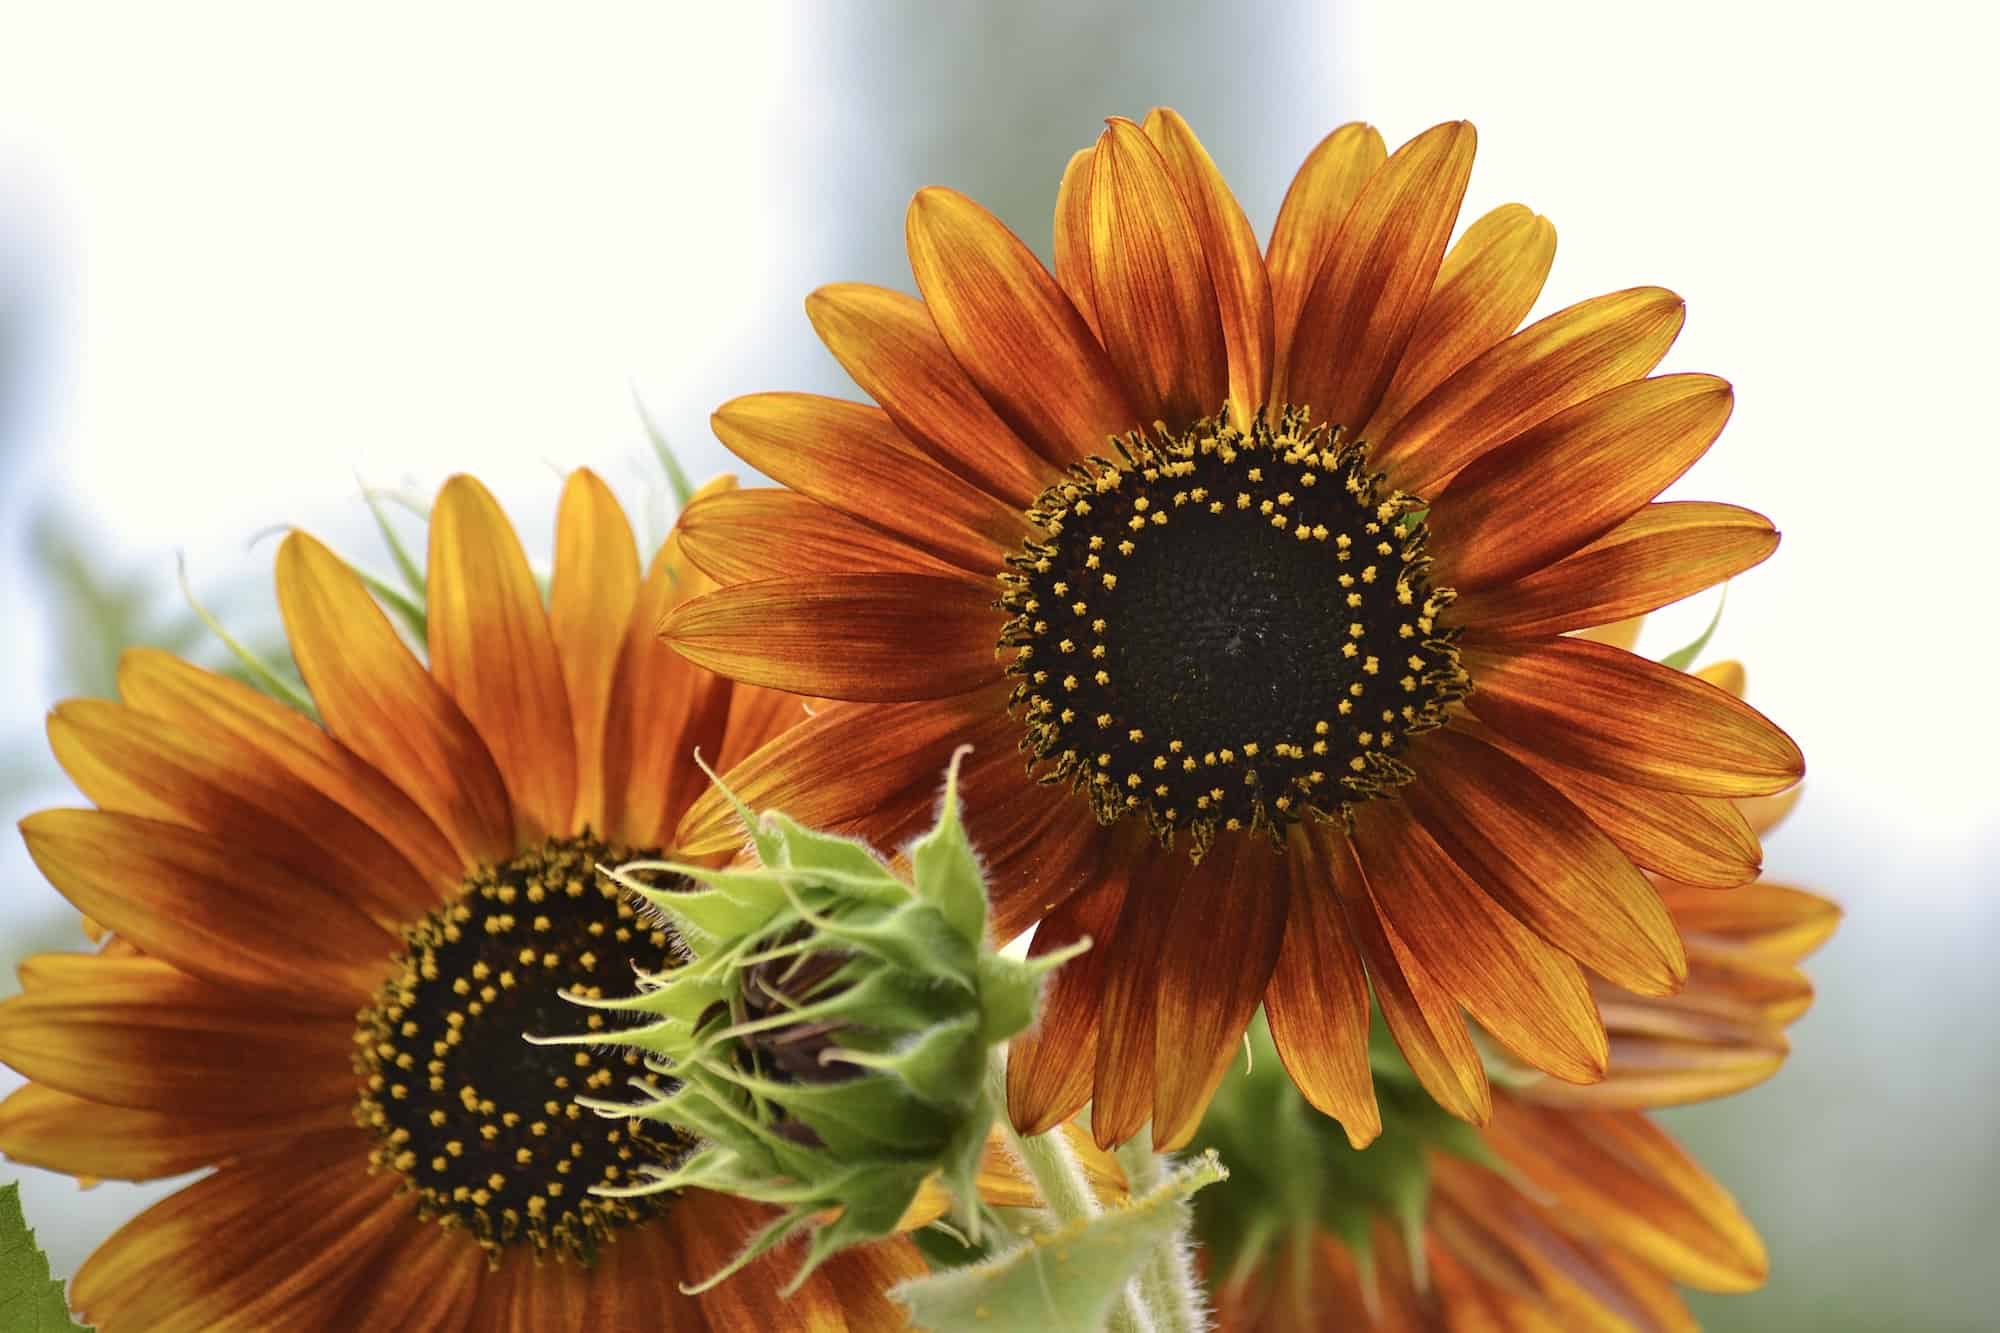 Three colorful sunflowers next to each other.